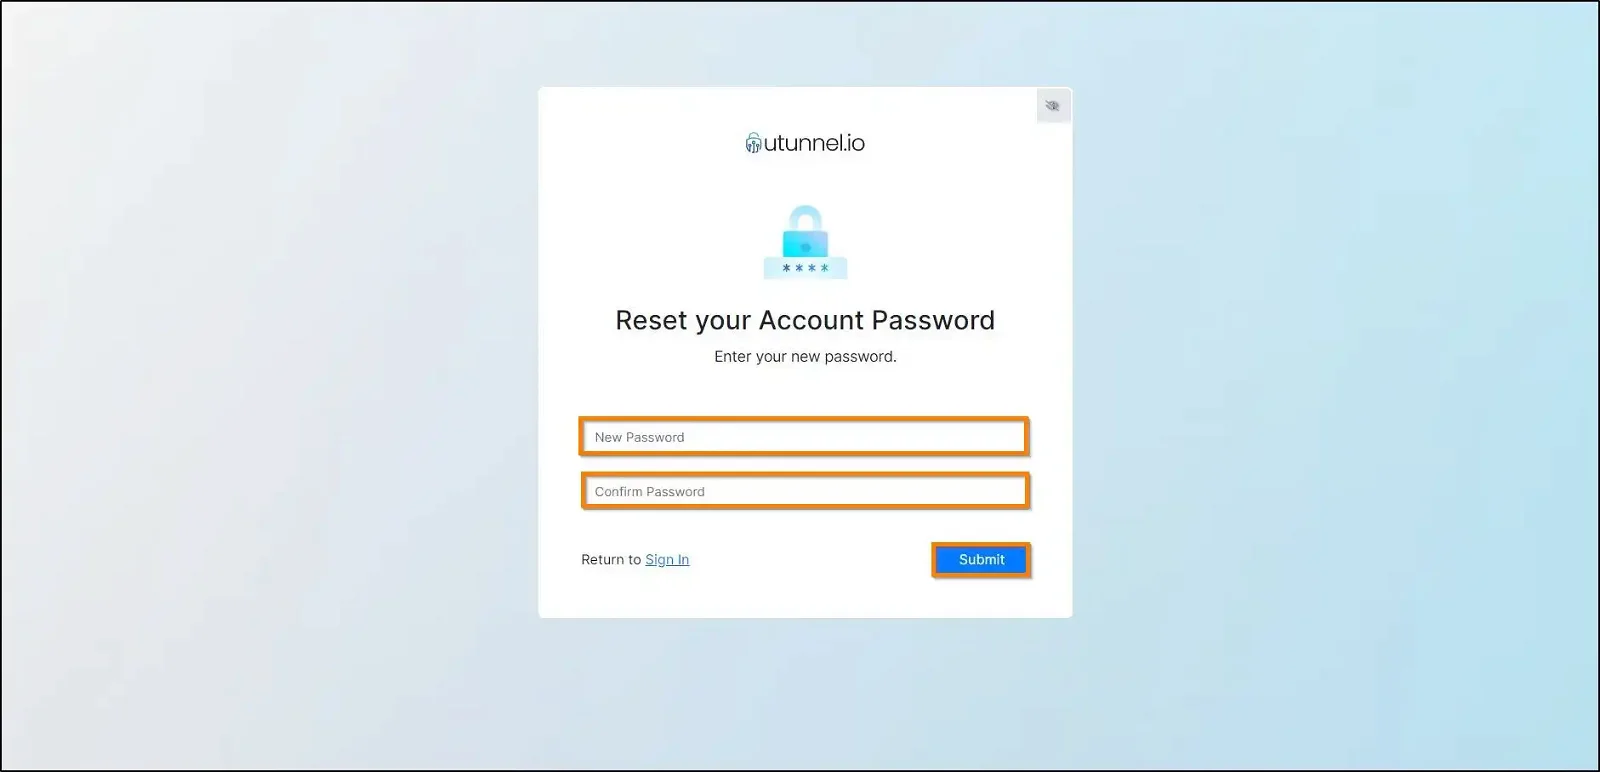 reset password confirmation page